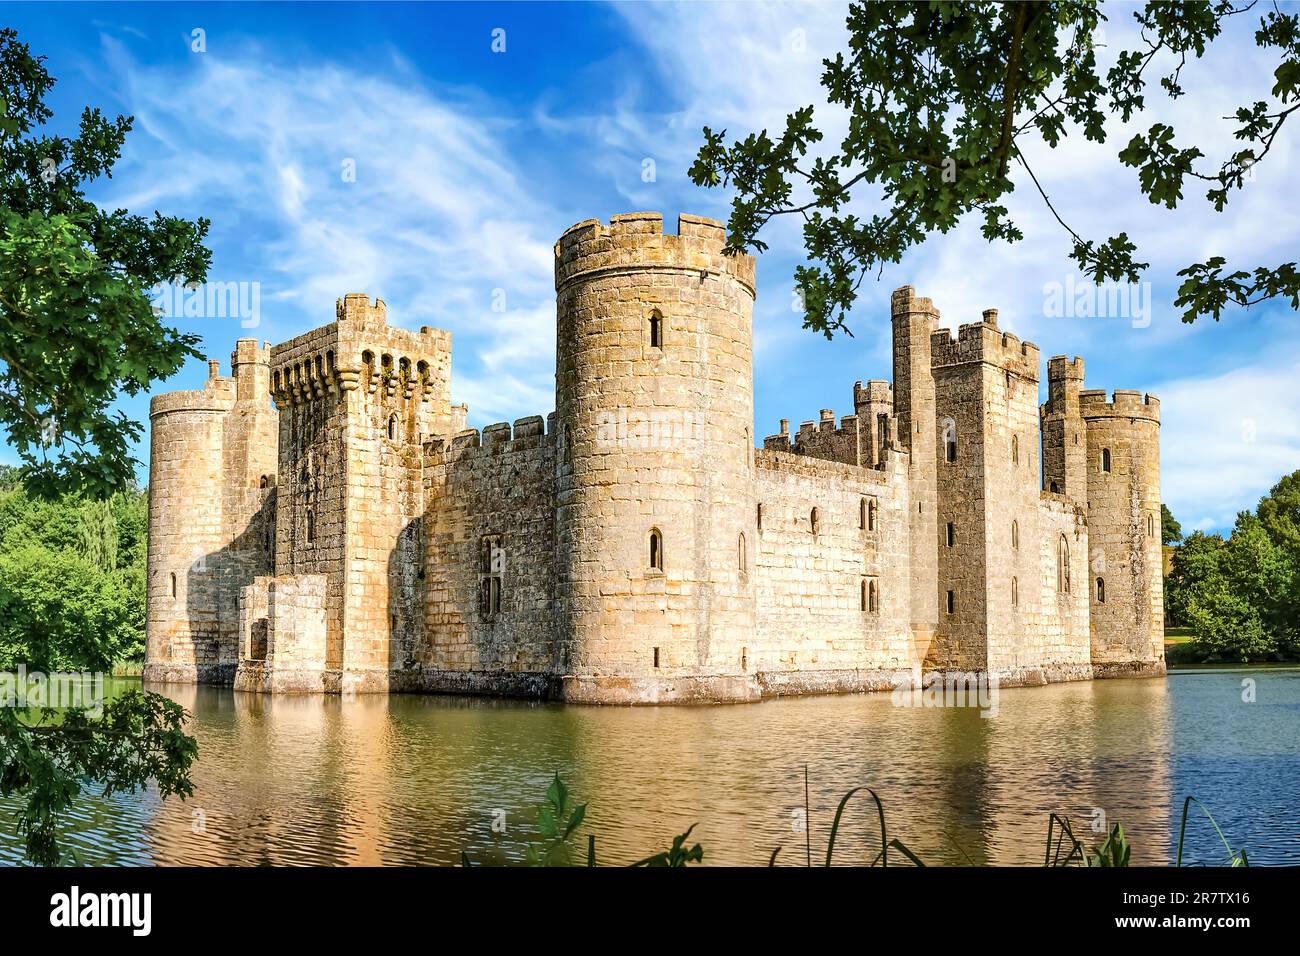 Sussex, United Kingdom - July 9, 2013: View of moated castle Bodiam near Robertsbridge on a sunny day. It was built in 1385. Stock Photo